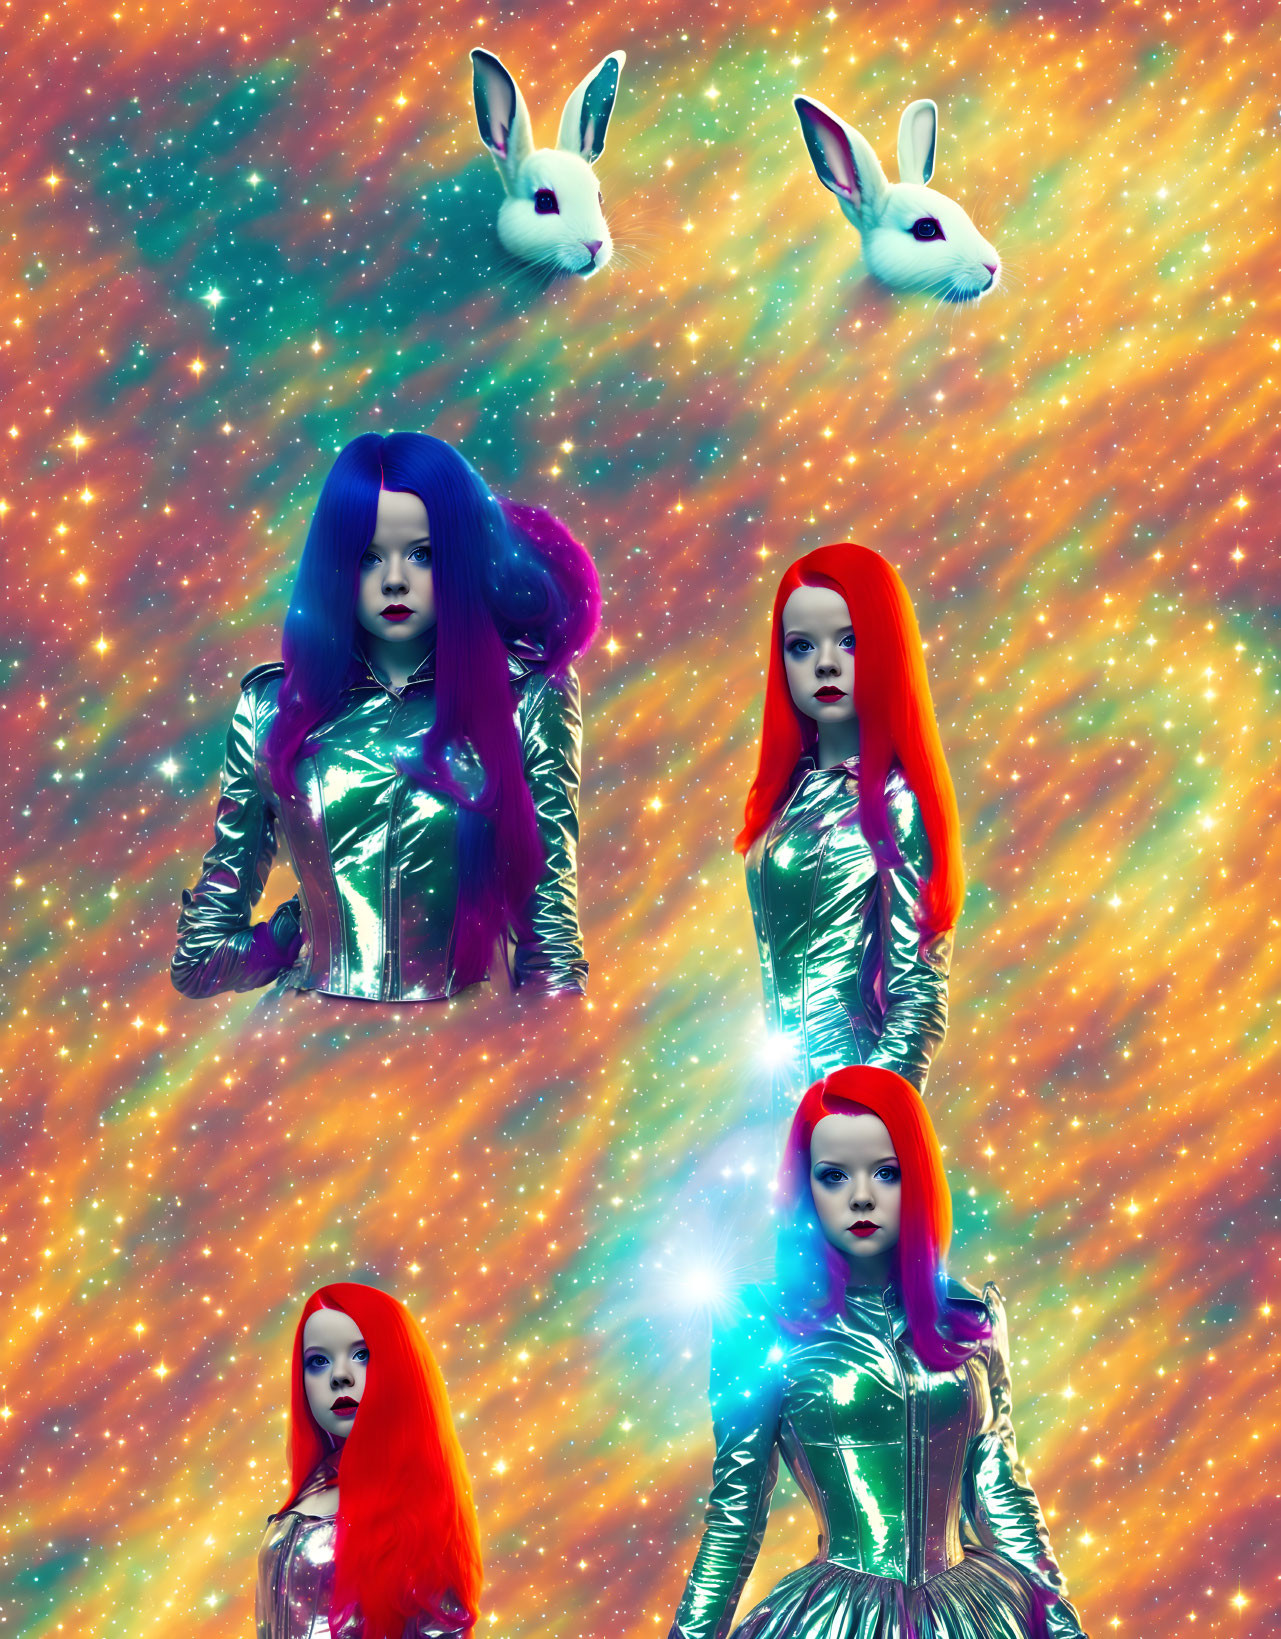 Futuristic digital art: vibrant hair, silver outfits, floating rabbit heads on multicolored star